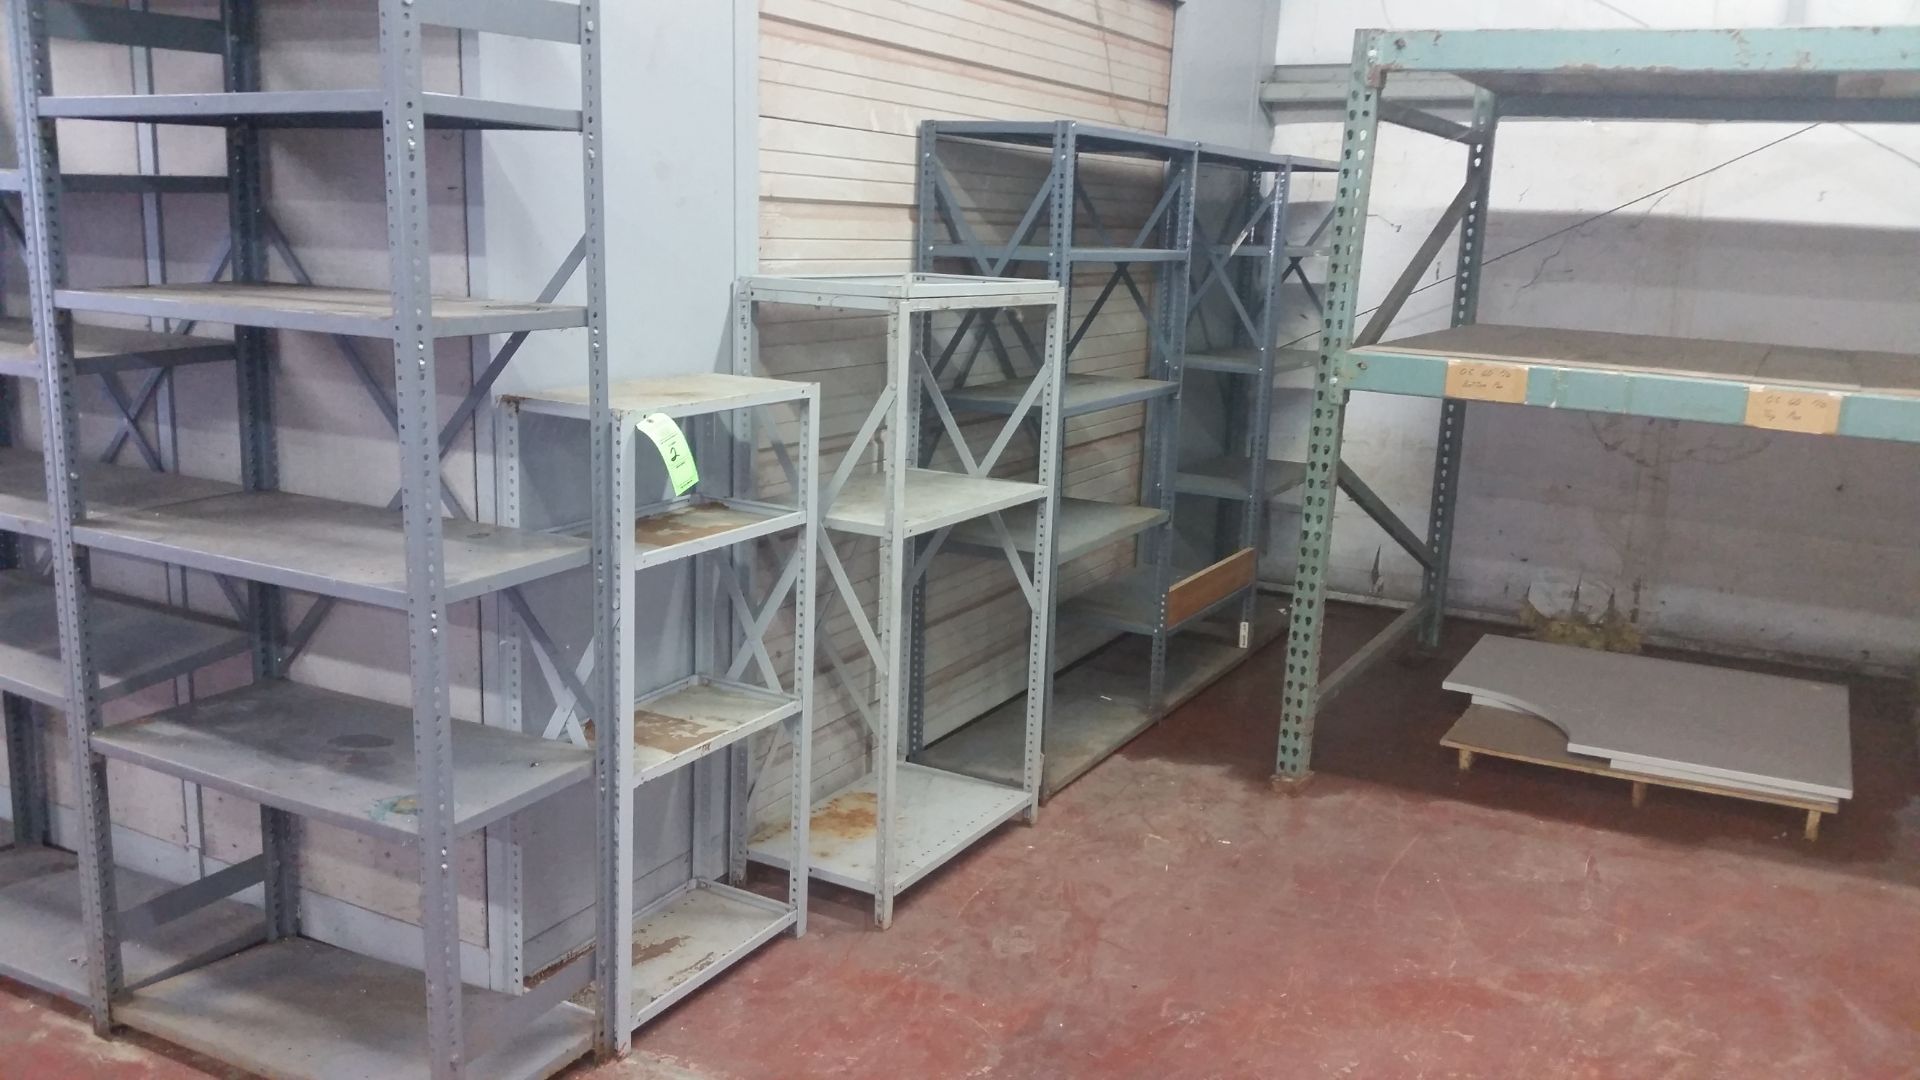 (5) SECTIONS OF PAN SHELVING